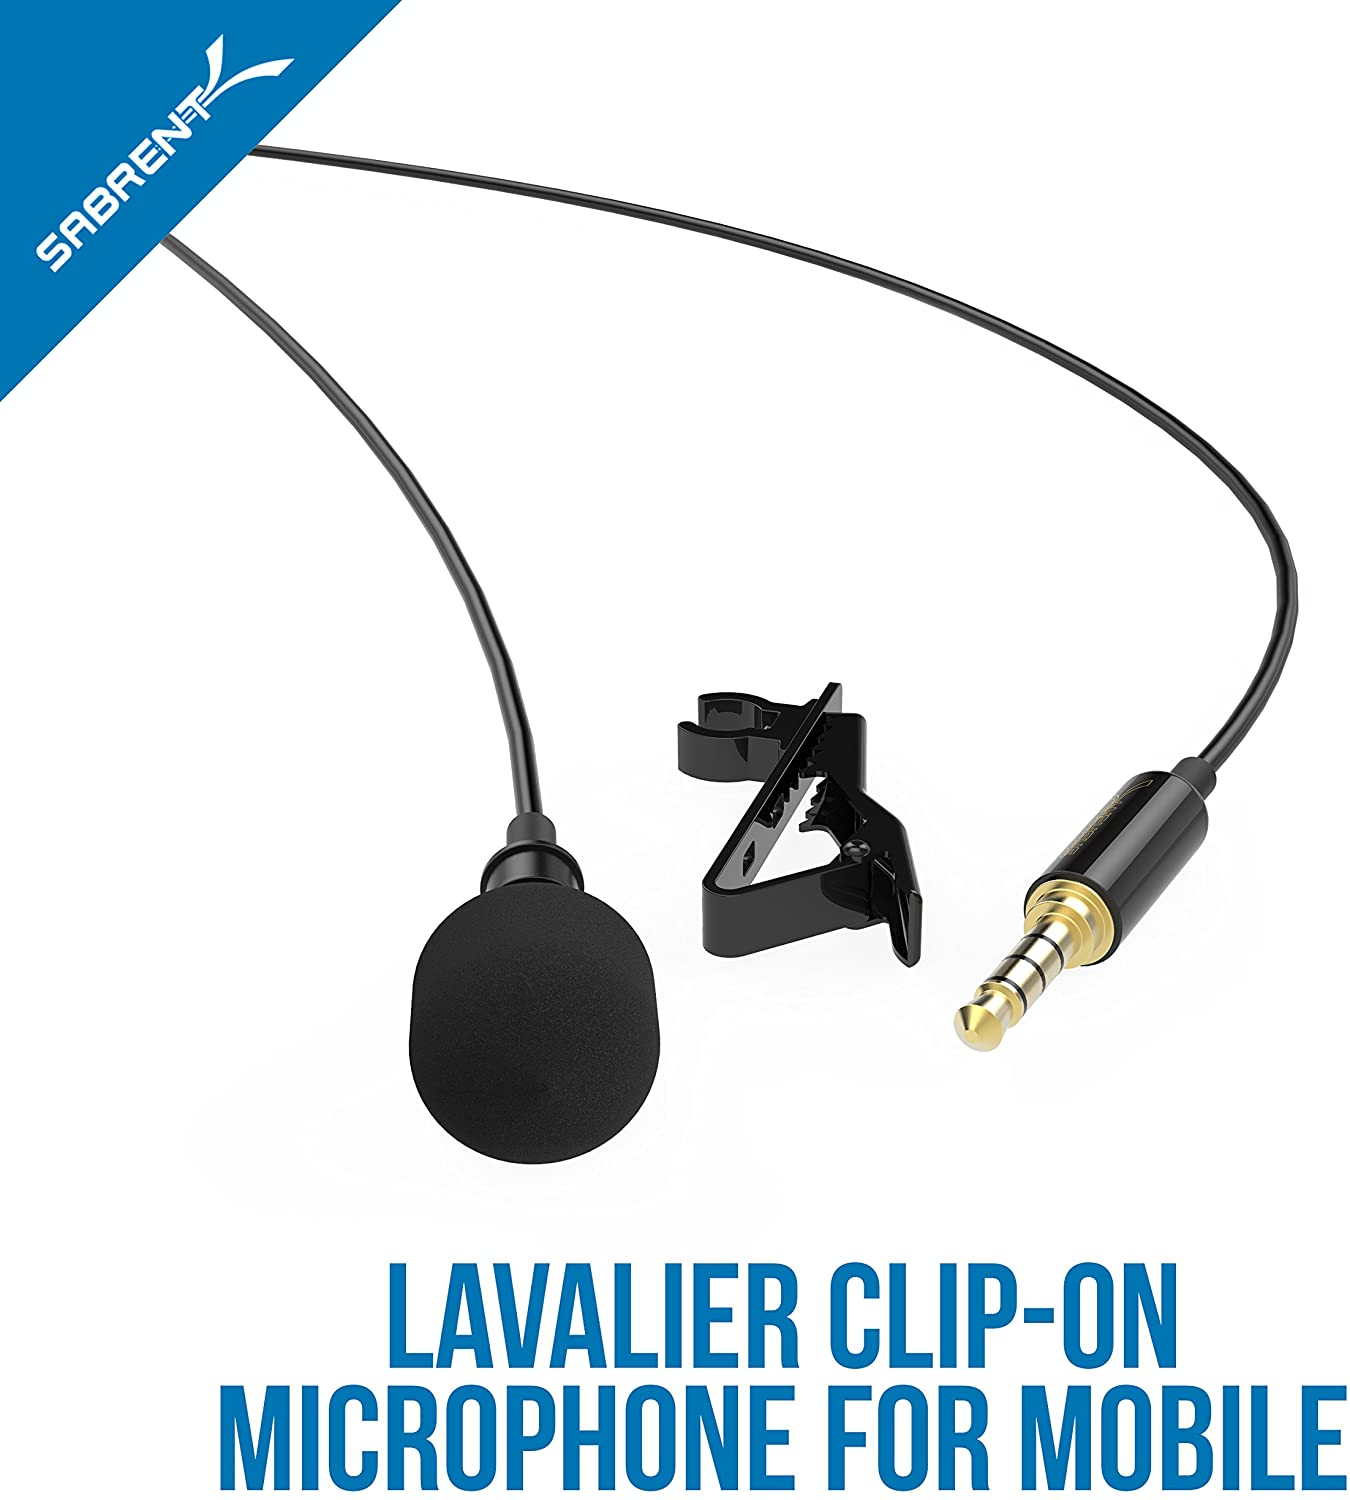 SABRENT Lavalier/Lapel Clip on Omnidirectional Condenser Microphone for iPhone & Android Smartphones or Any Other Mobile Device (AU-SMCR)